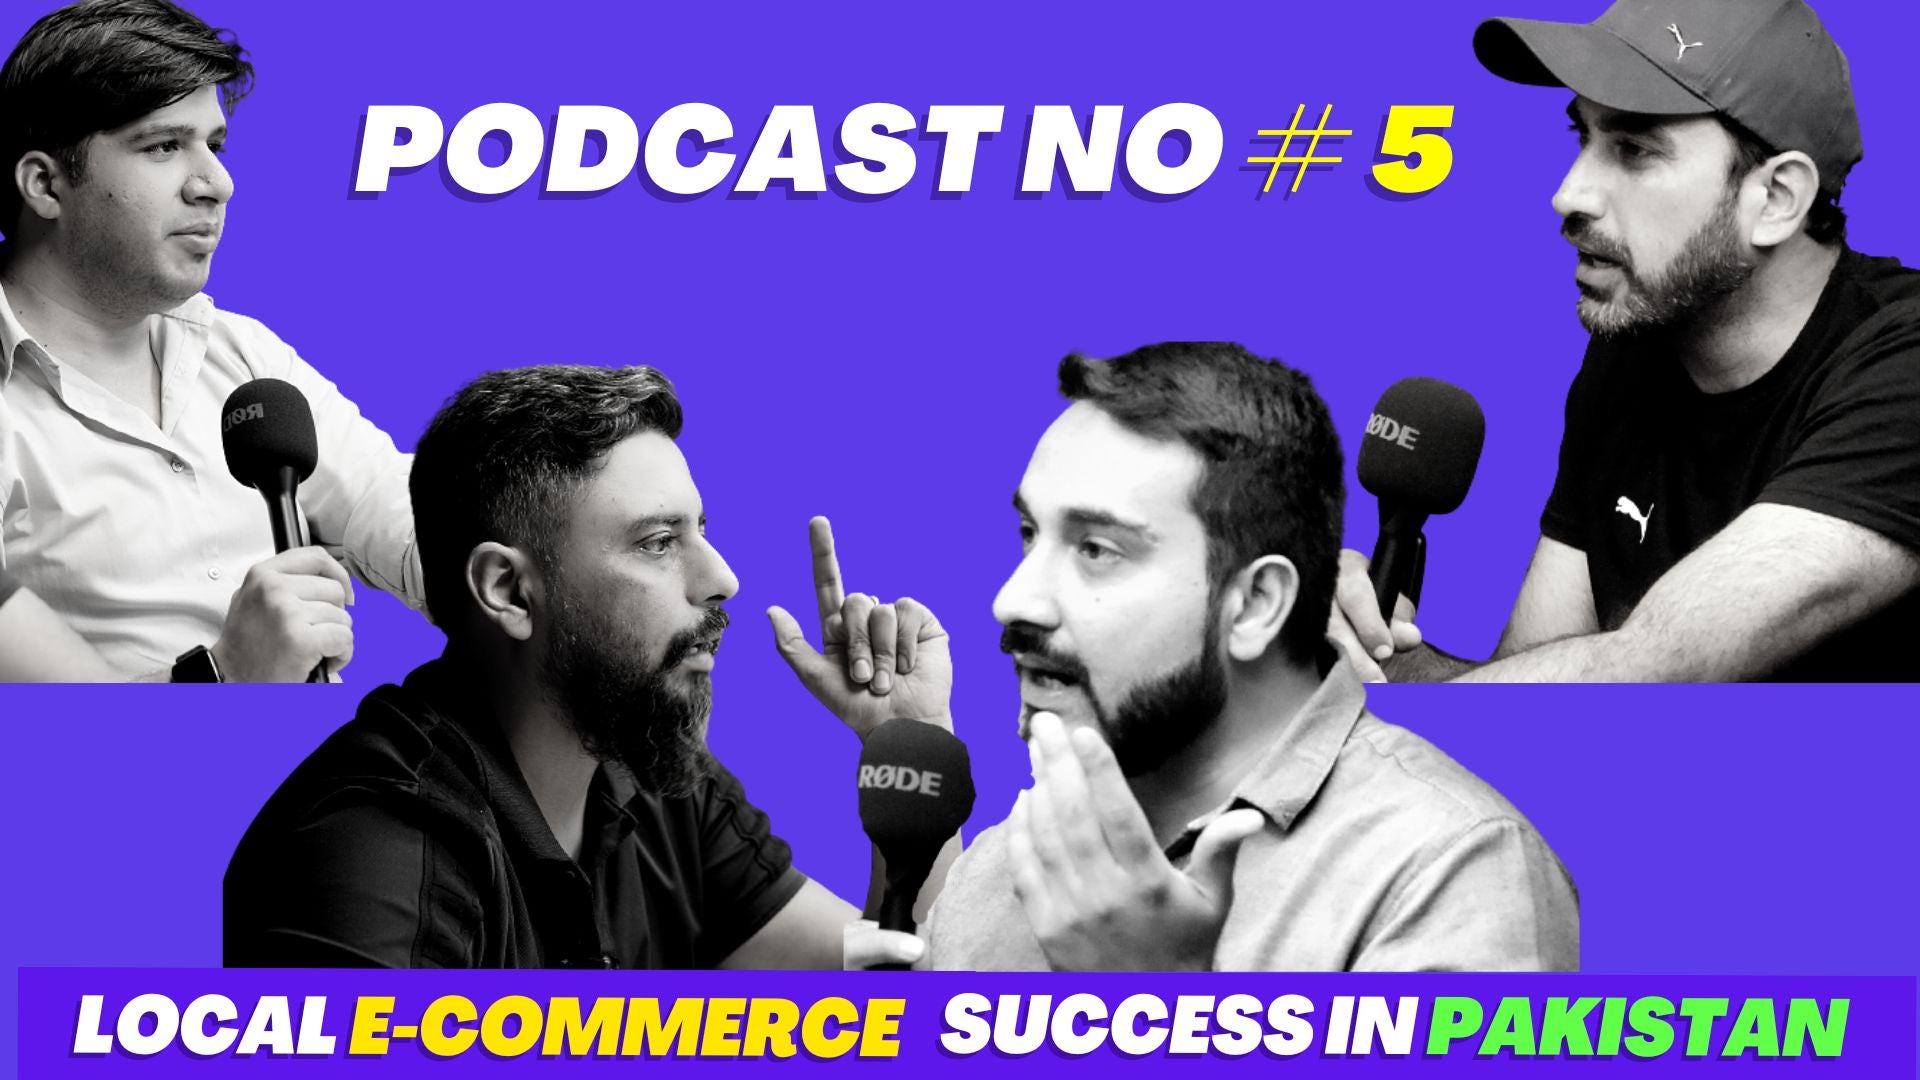 Learn Local Ecommerce in Pakistan Episode 5